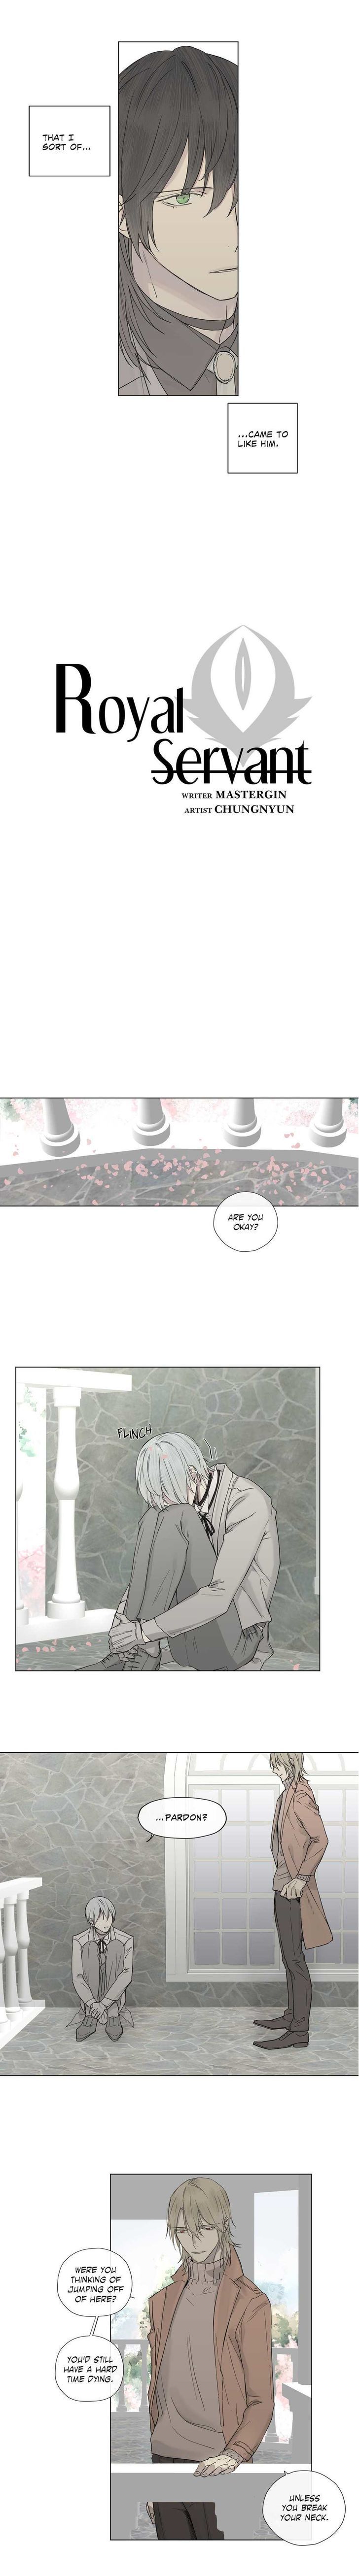 Royal Servant - Chapter 13 Page 2